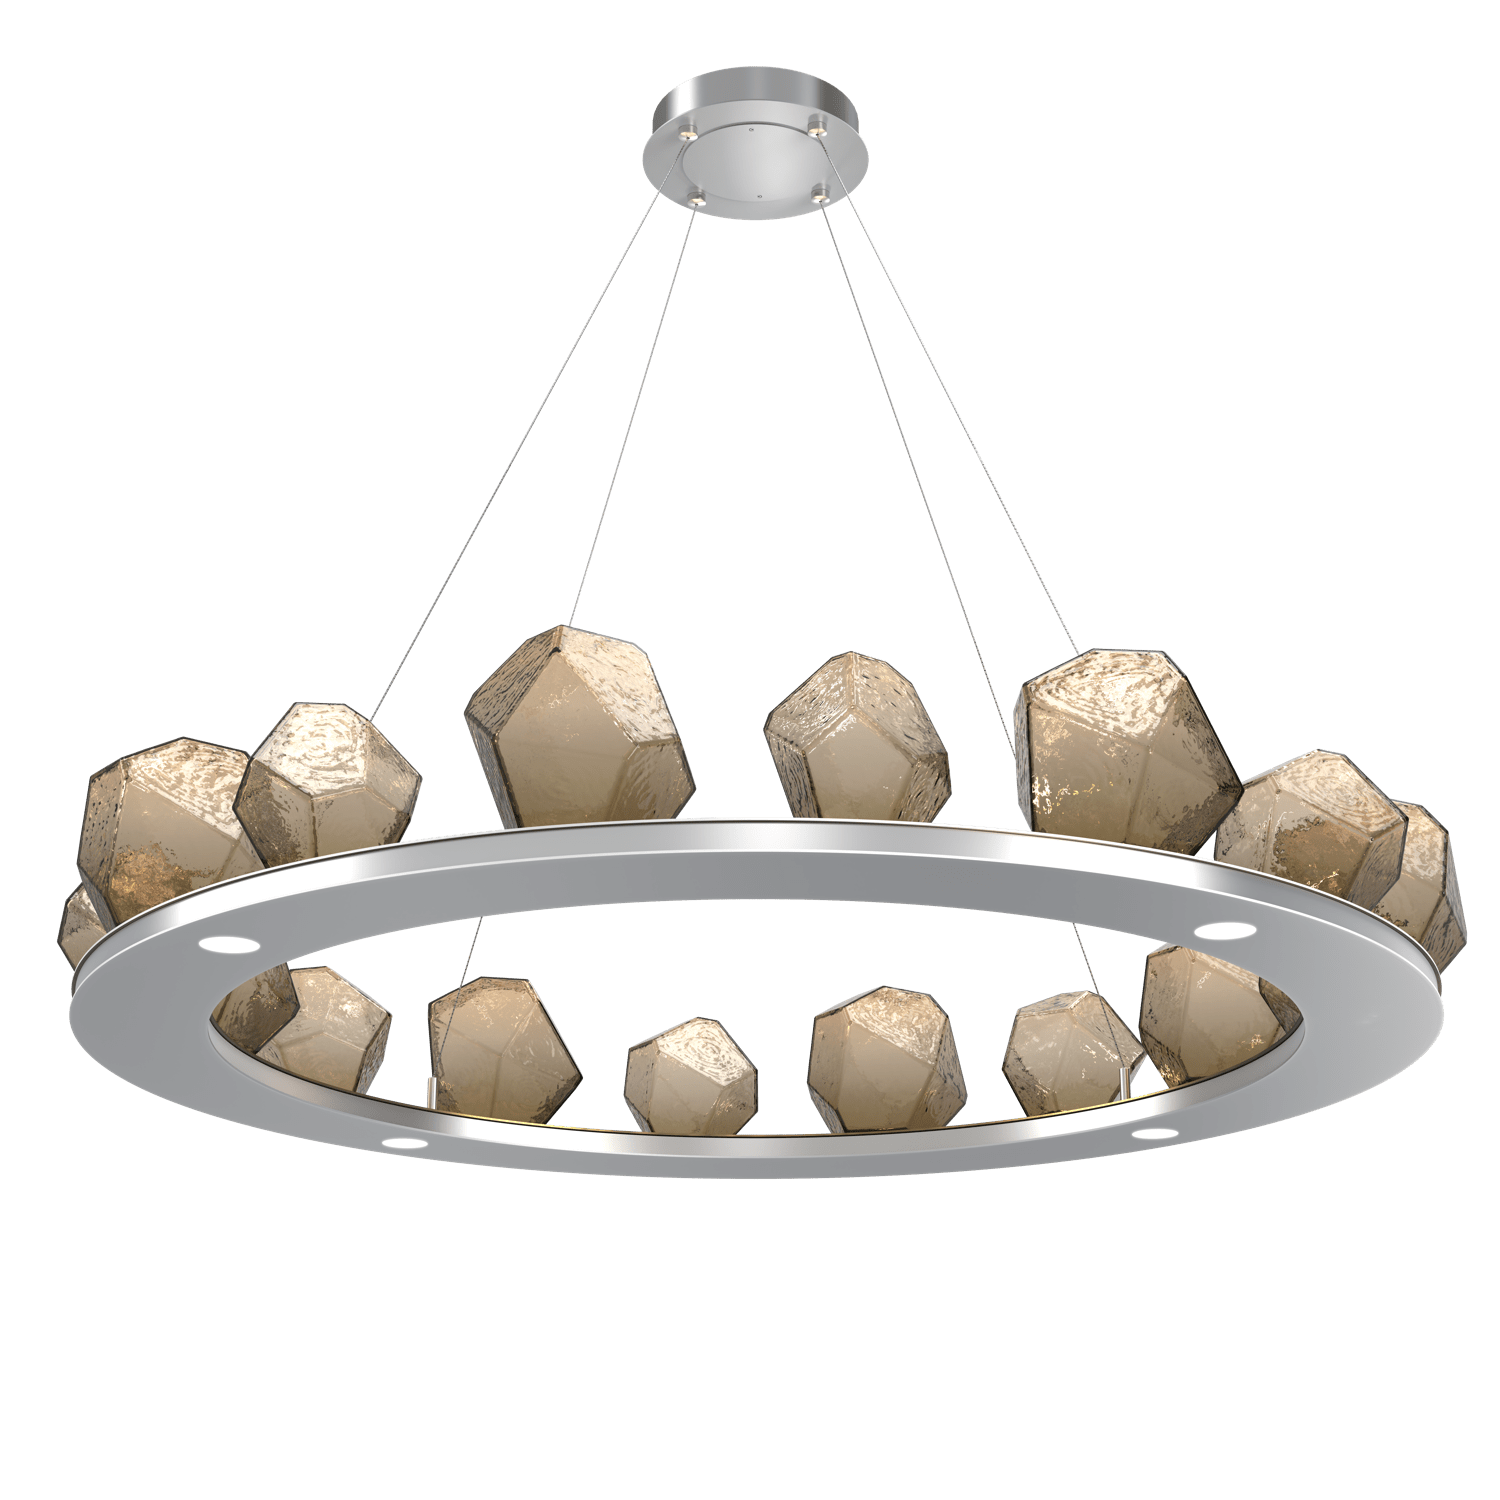 CHB0039-0D-CS-B-Hammerton-Studio-Gem-48-inch-ring-chandelier-with-classic-silver-finish-and-bronze-blown-glass-shades-and-LED-lamping